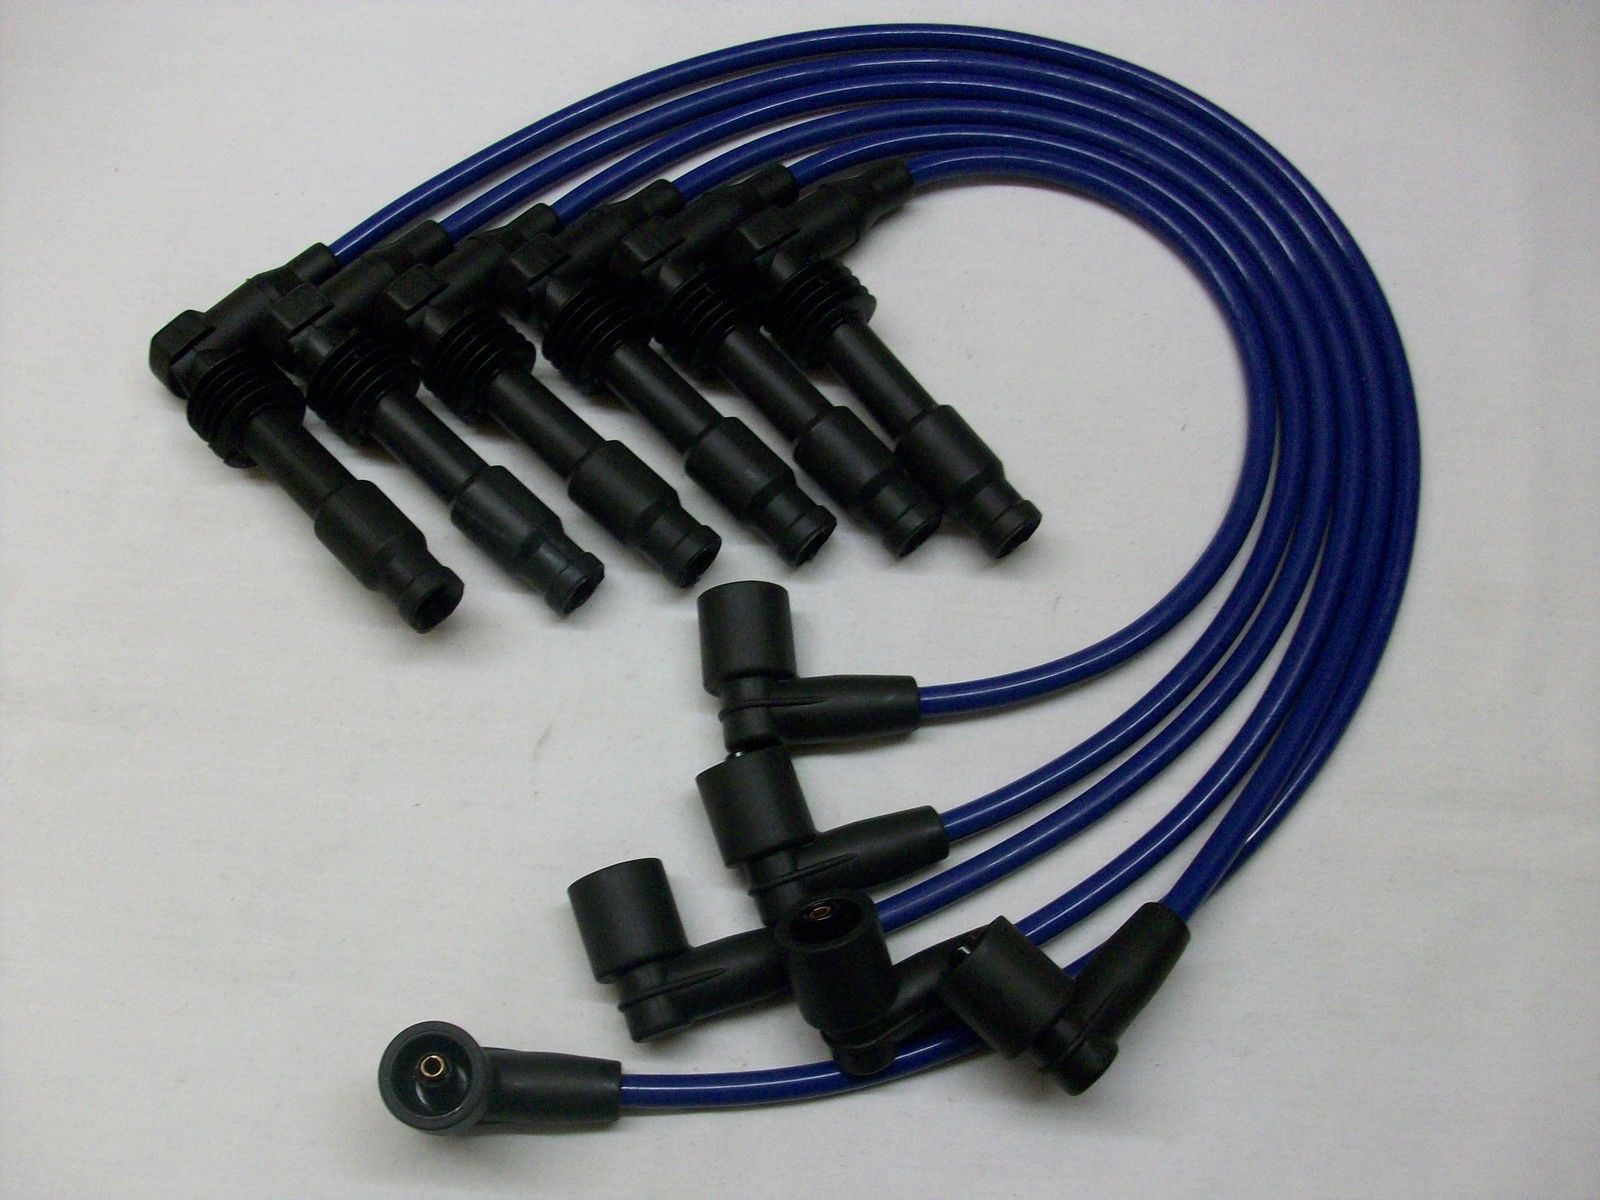 Blue 8mm Performance Ignition Leads Will Fit. Vauxhall Opel Omega V6 Leads